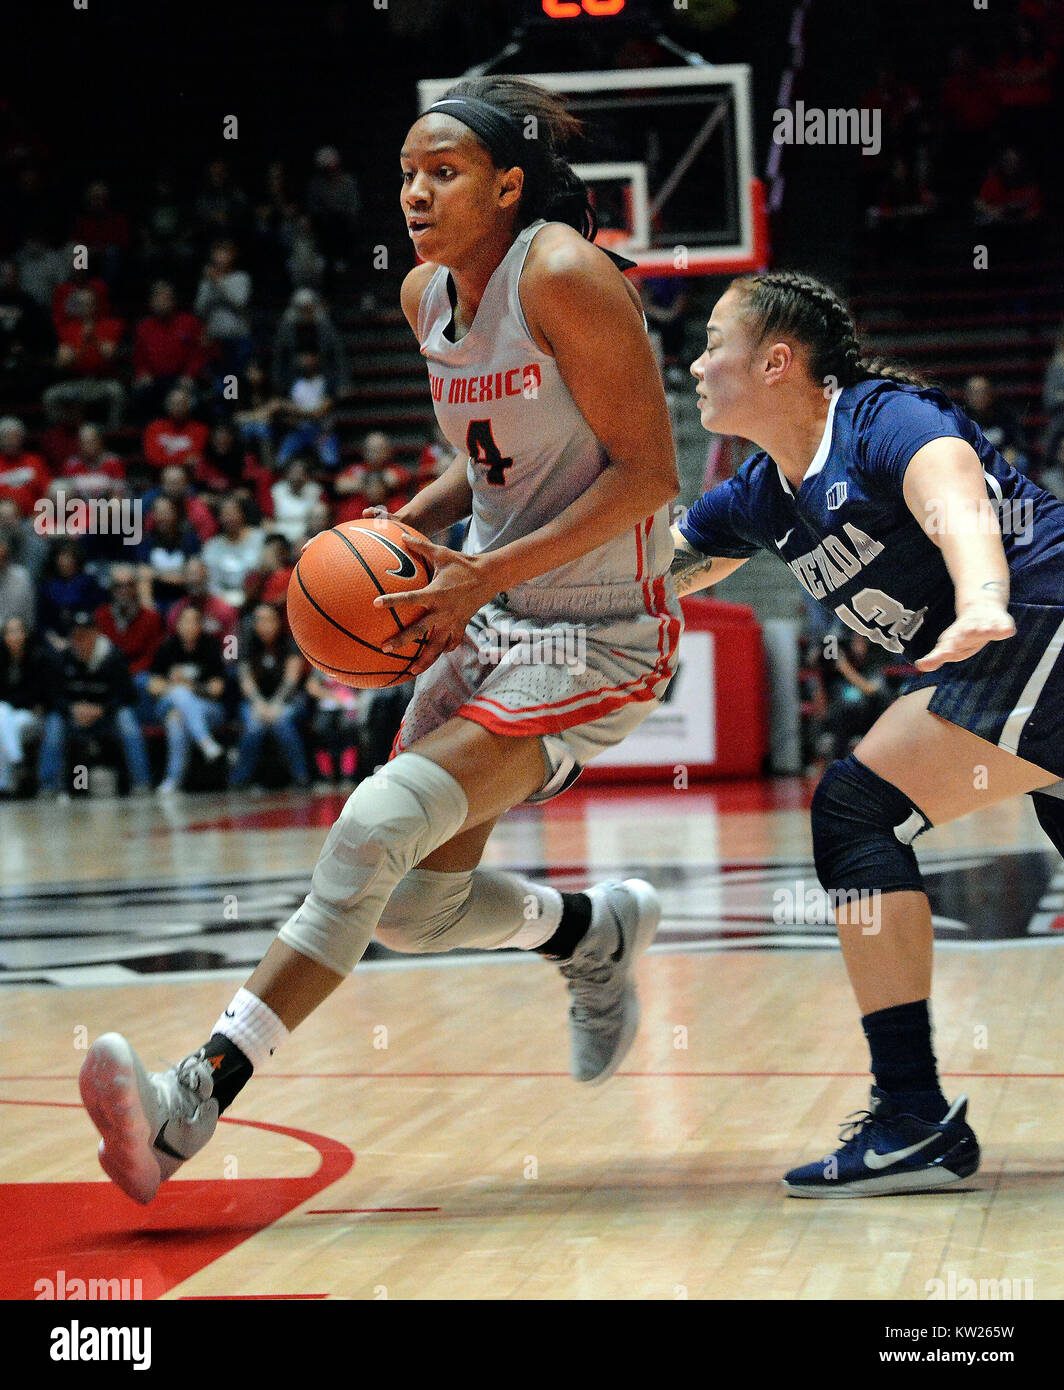 Albuquerque, NM, USA. 30th Dec, 2017. UNM's # 4 Alex Lapeyrolerie drives into the paint against Nevada's # 13 T Moe in their game Saturday afternoon in the Pit. Saturday, Dec. 30, 2017. Credit: Jim Thompson/Albuquerque Journal/ZUMA Wire/Alamy Live News Stock Photo